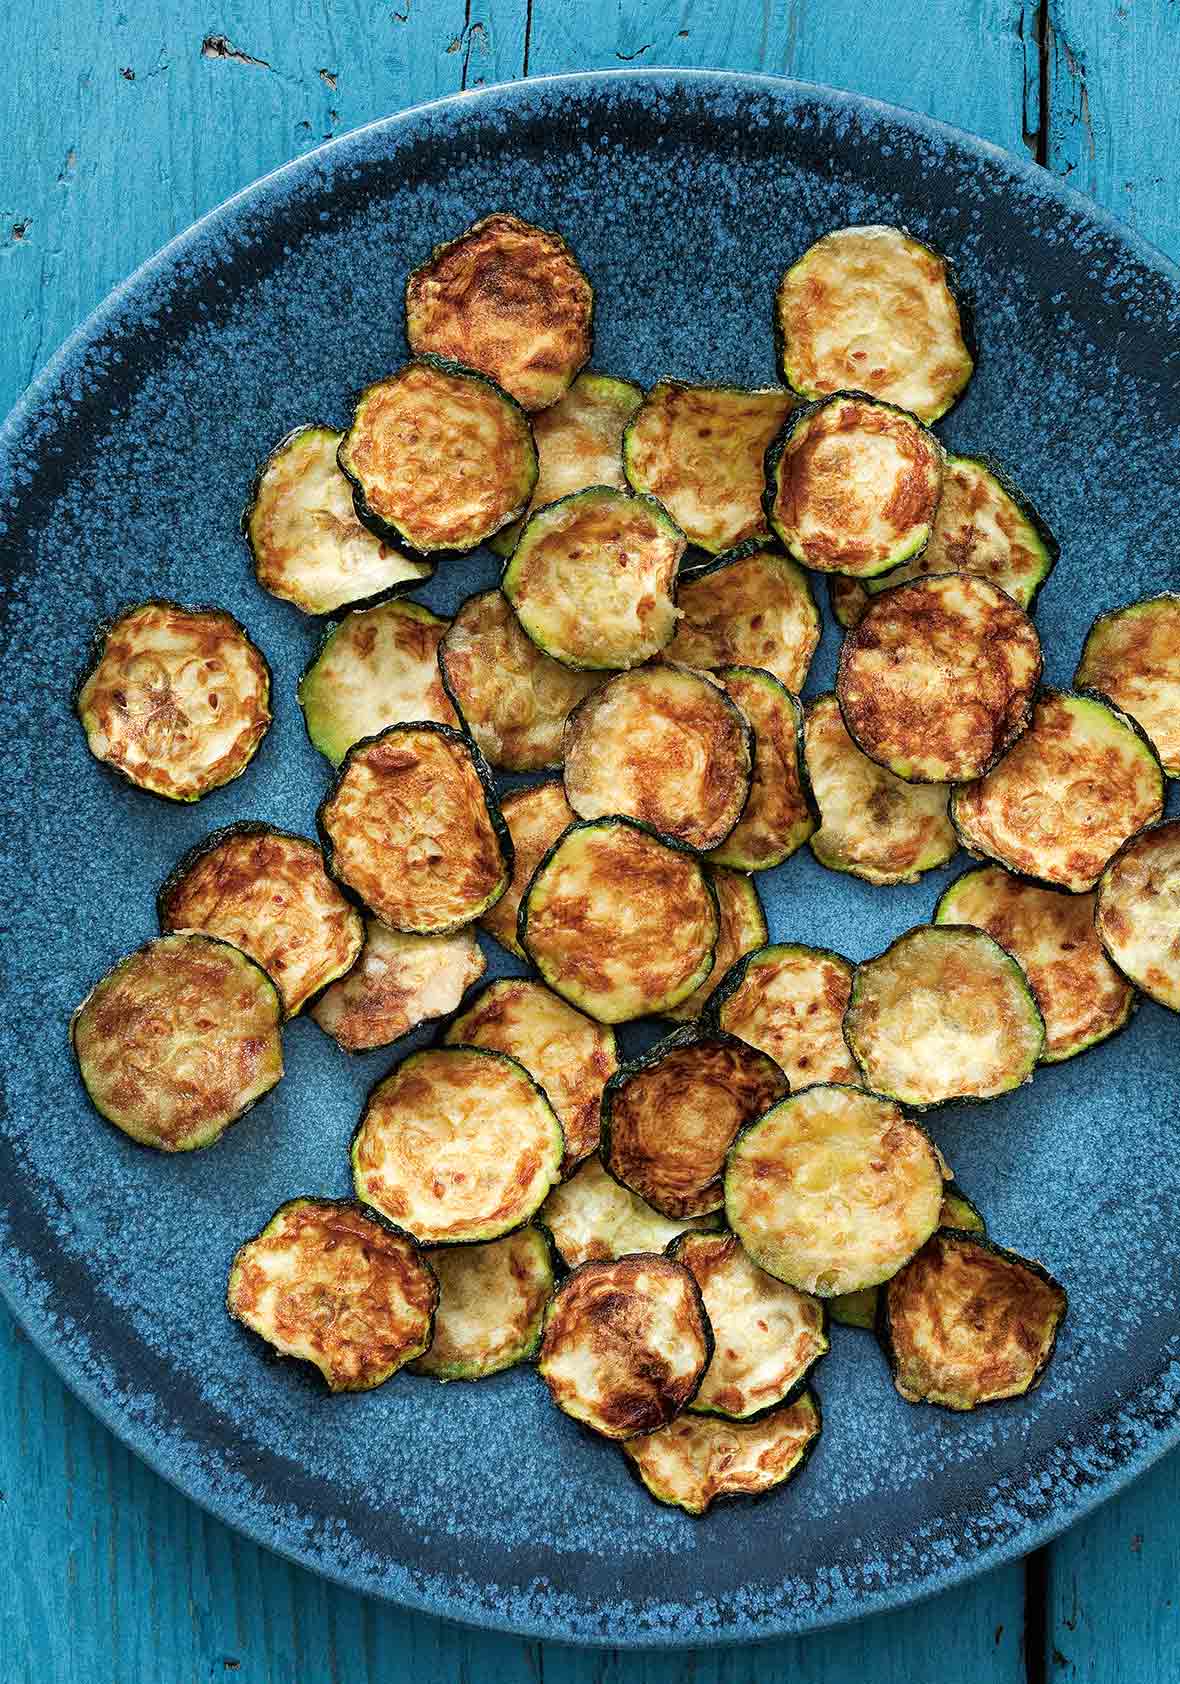 A blue plate filled with slices of zucchini crisps.